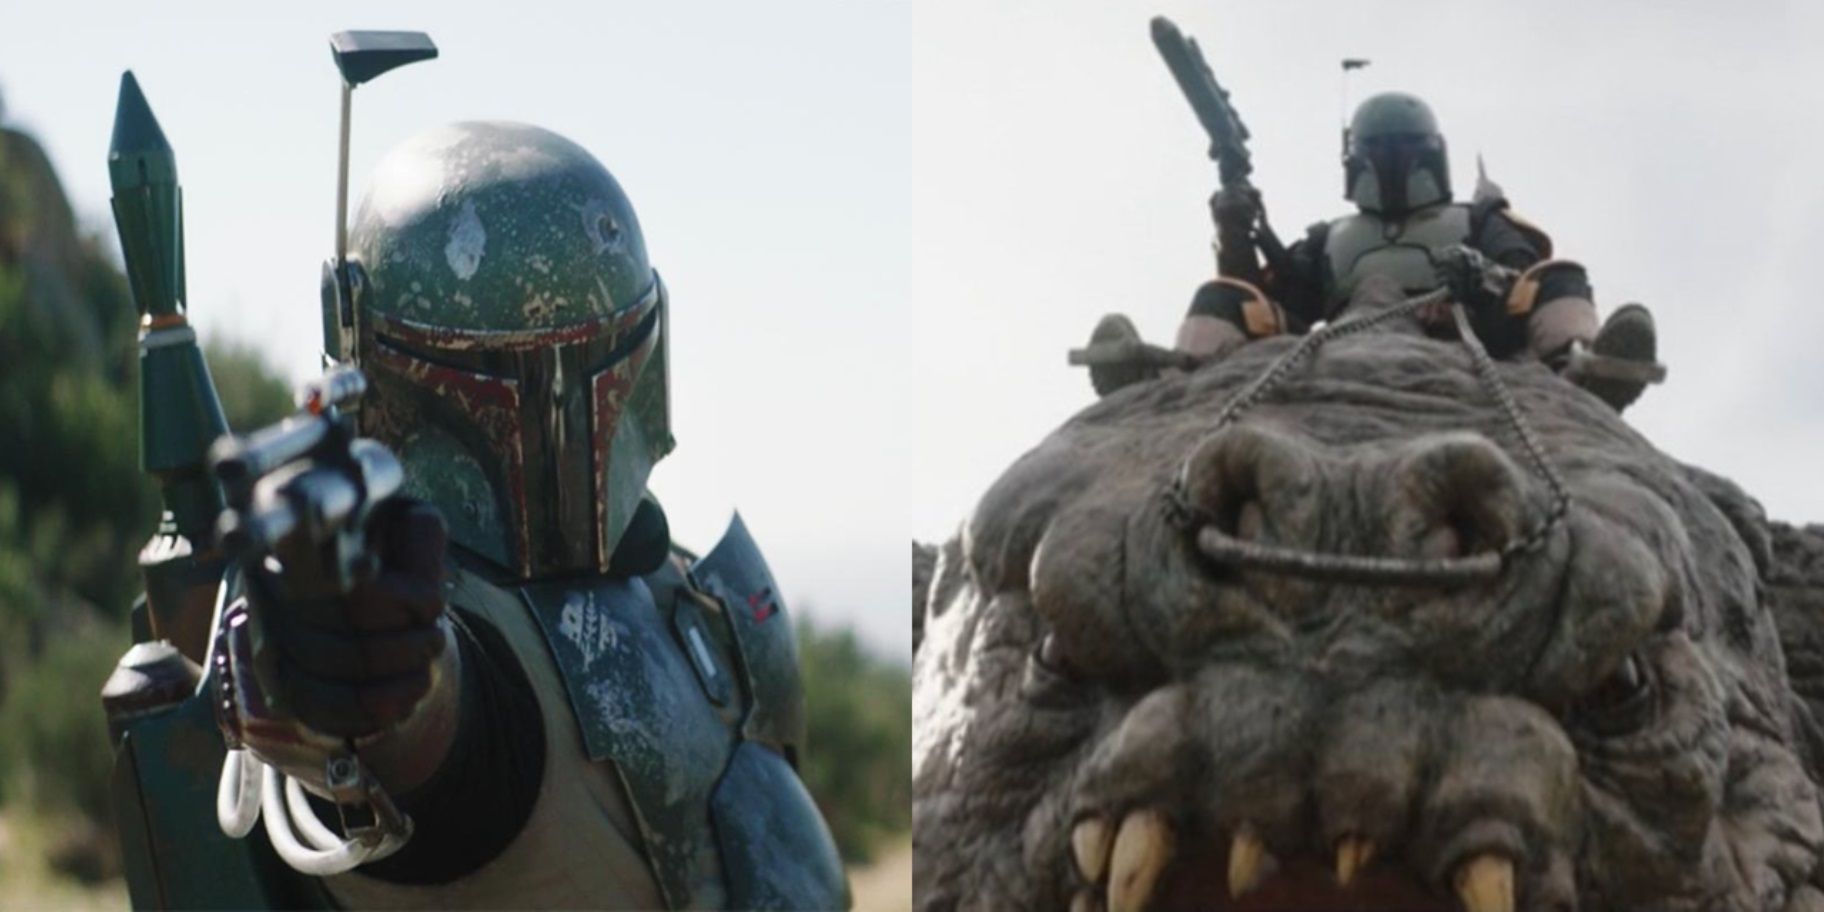 Split image of Boba pointing a blaster in The Mandalorian and riding a rancor in The Book of Boba Fett